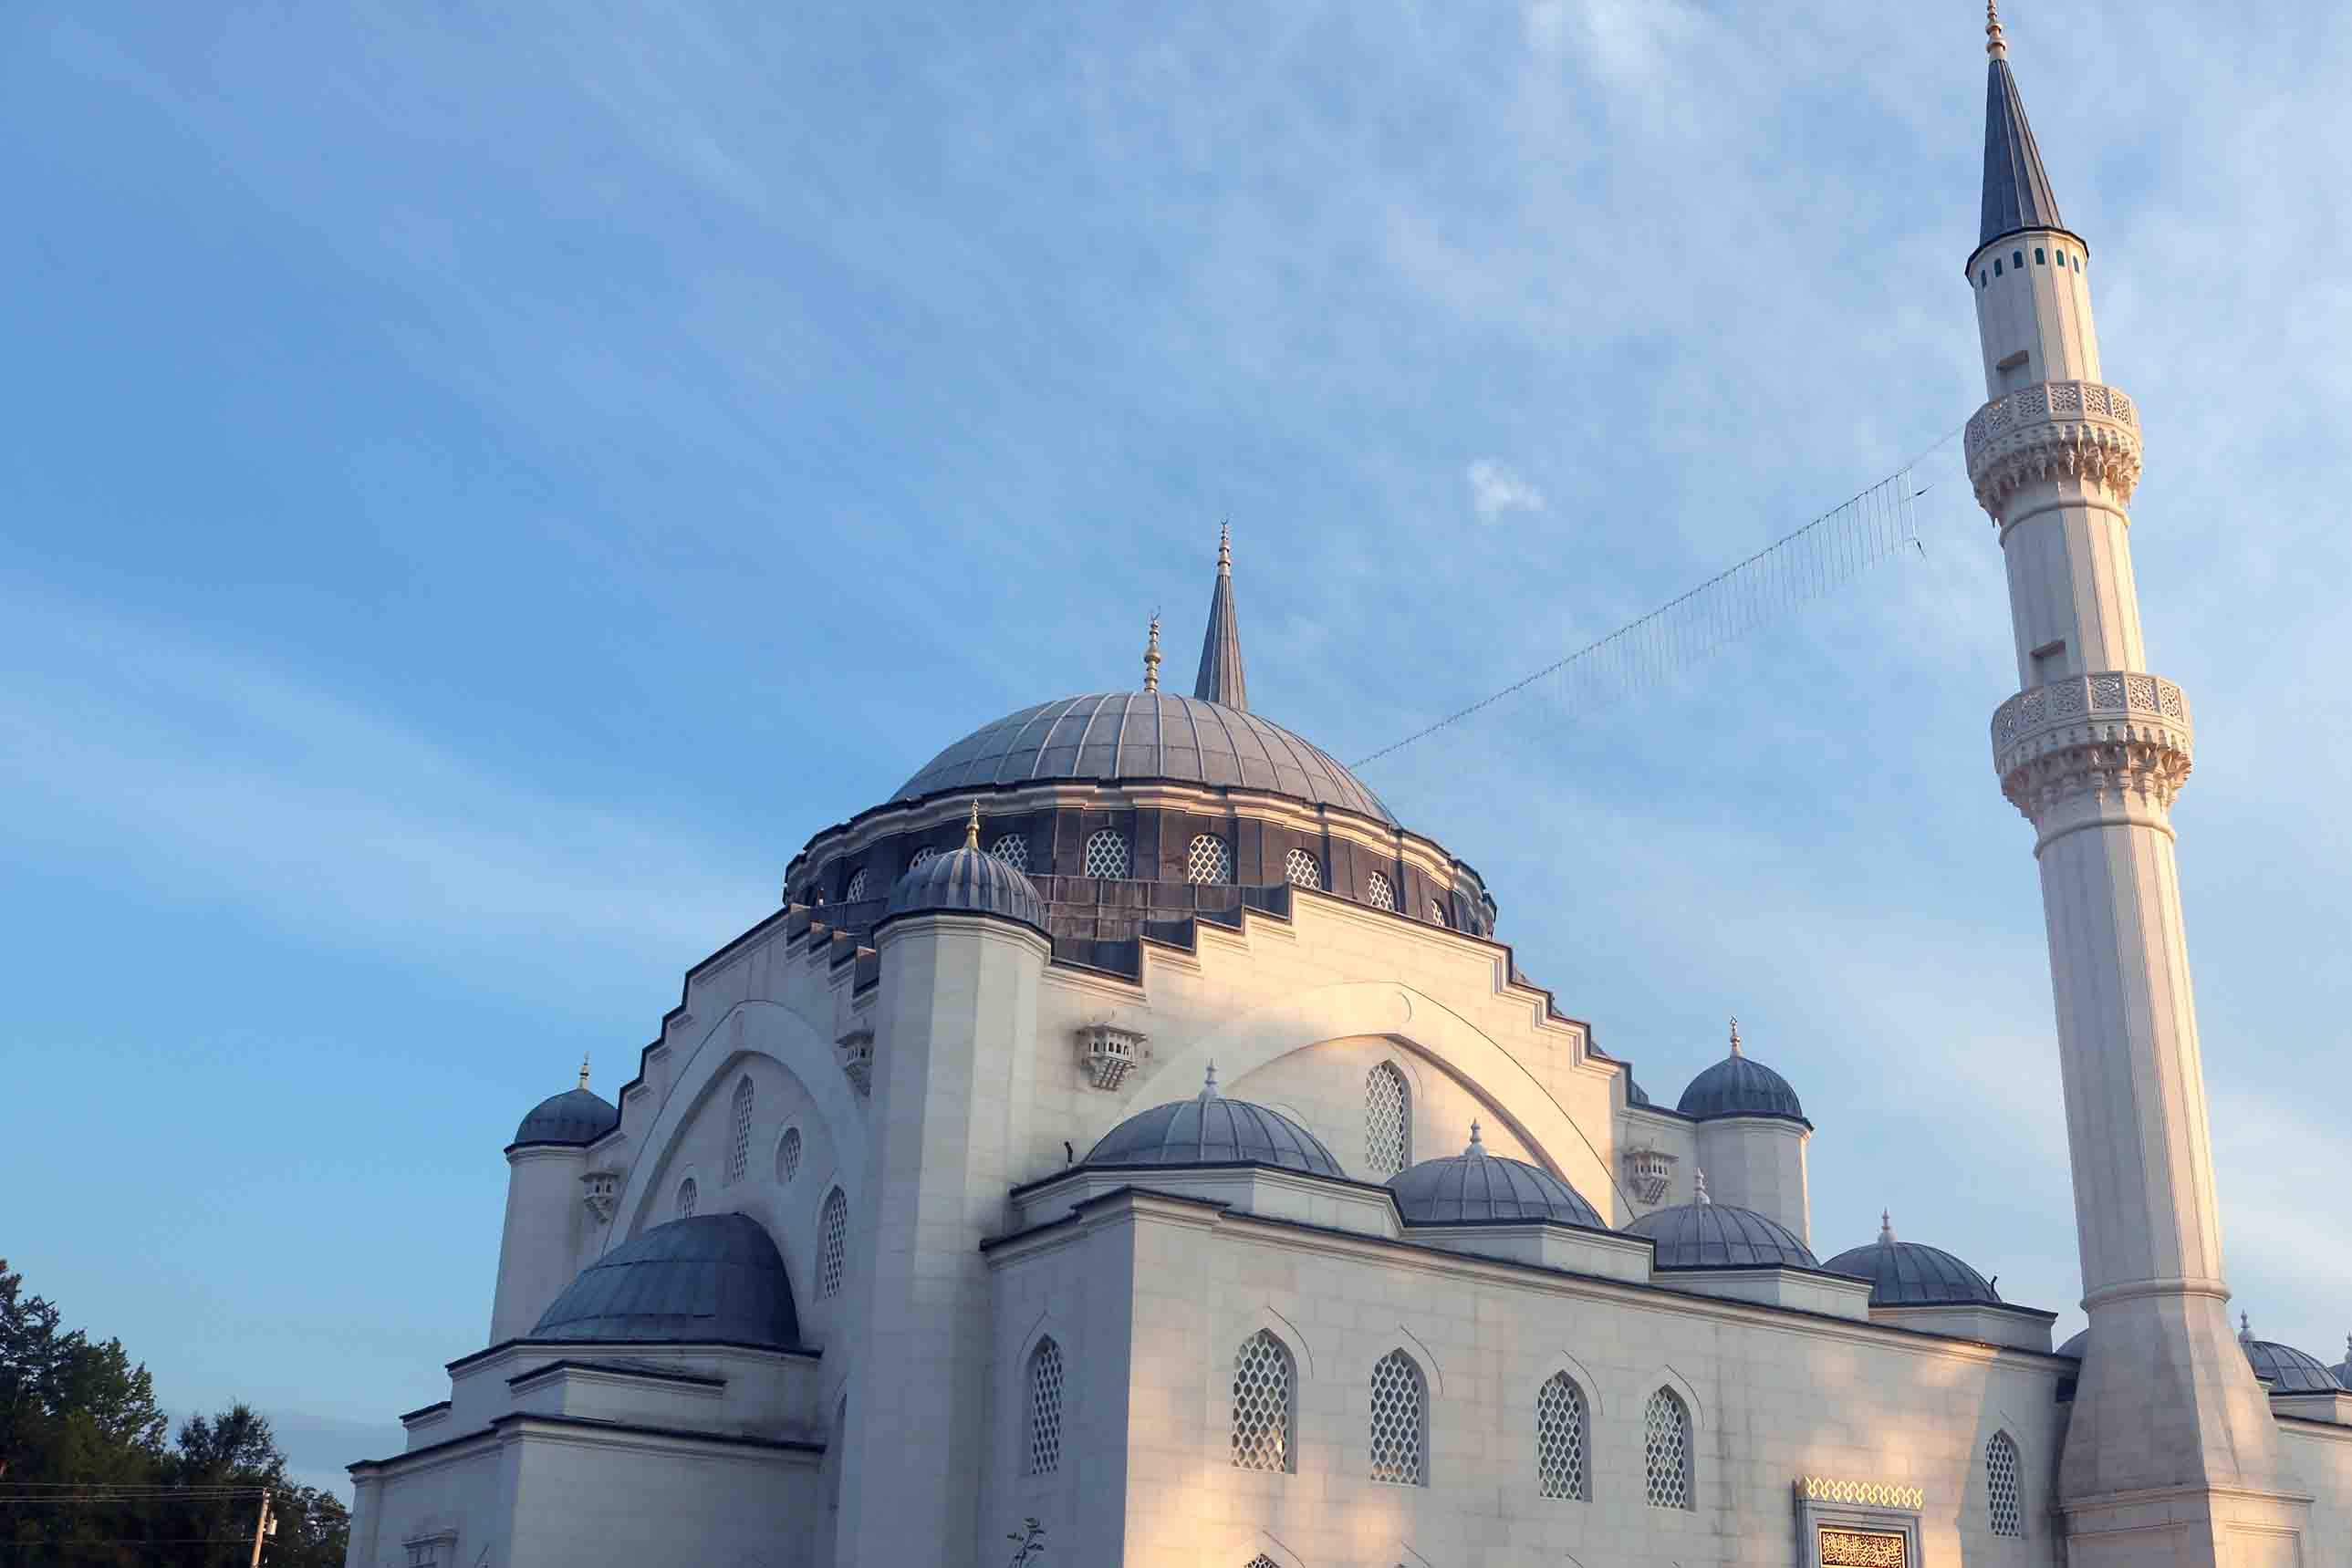 A grand mosque with a large blue dome